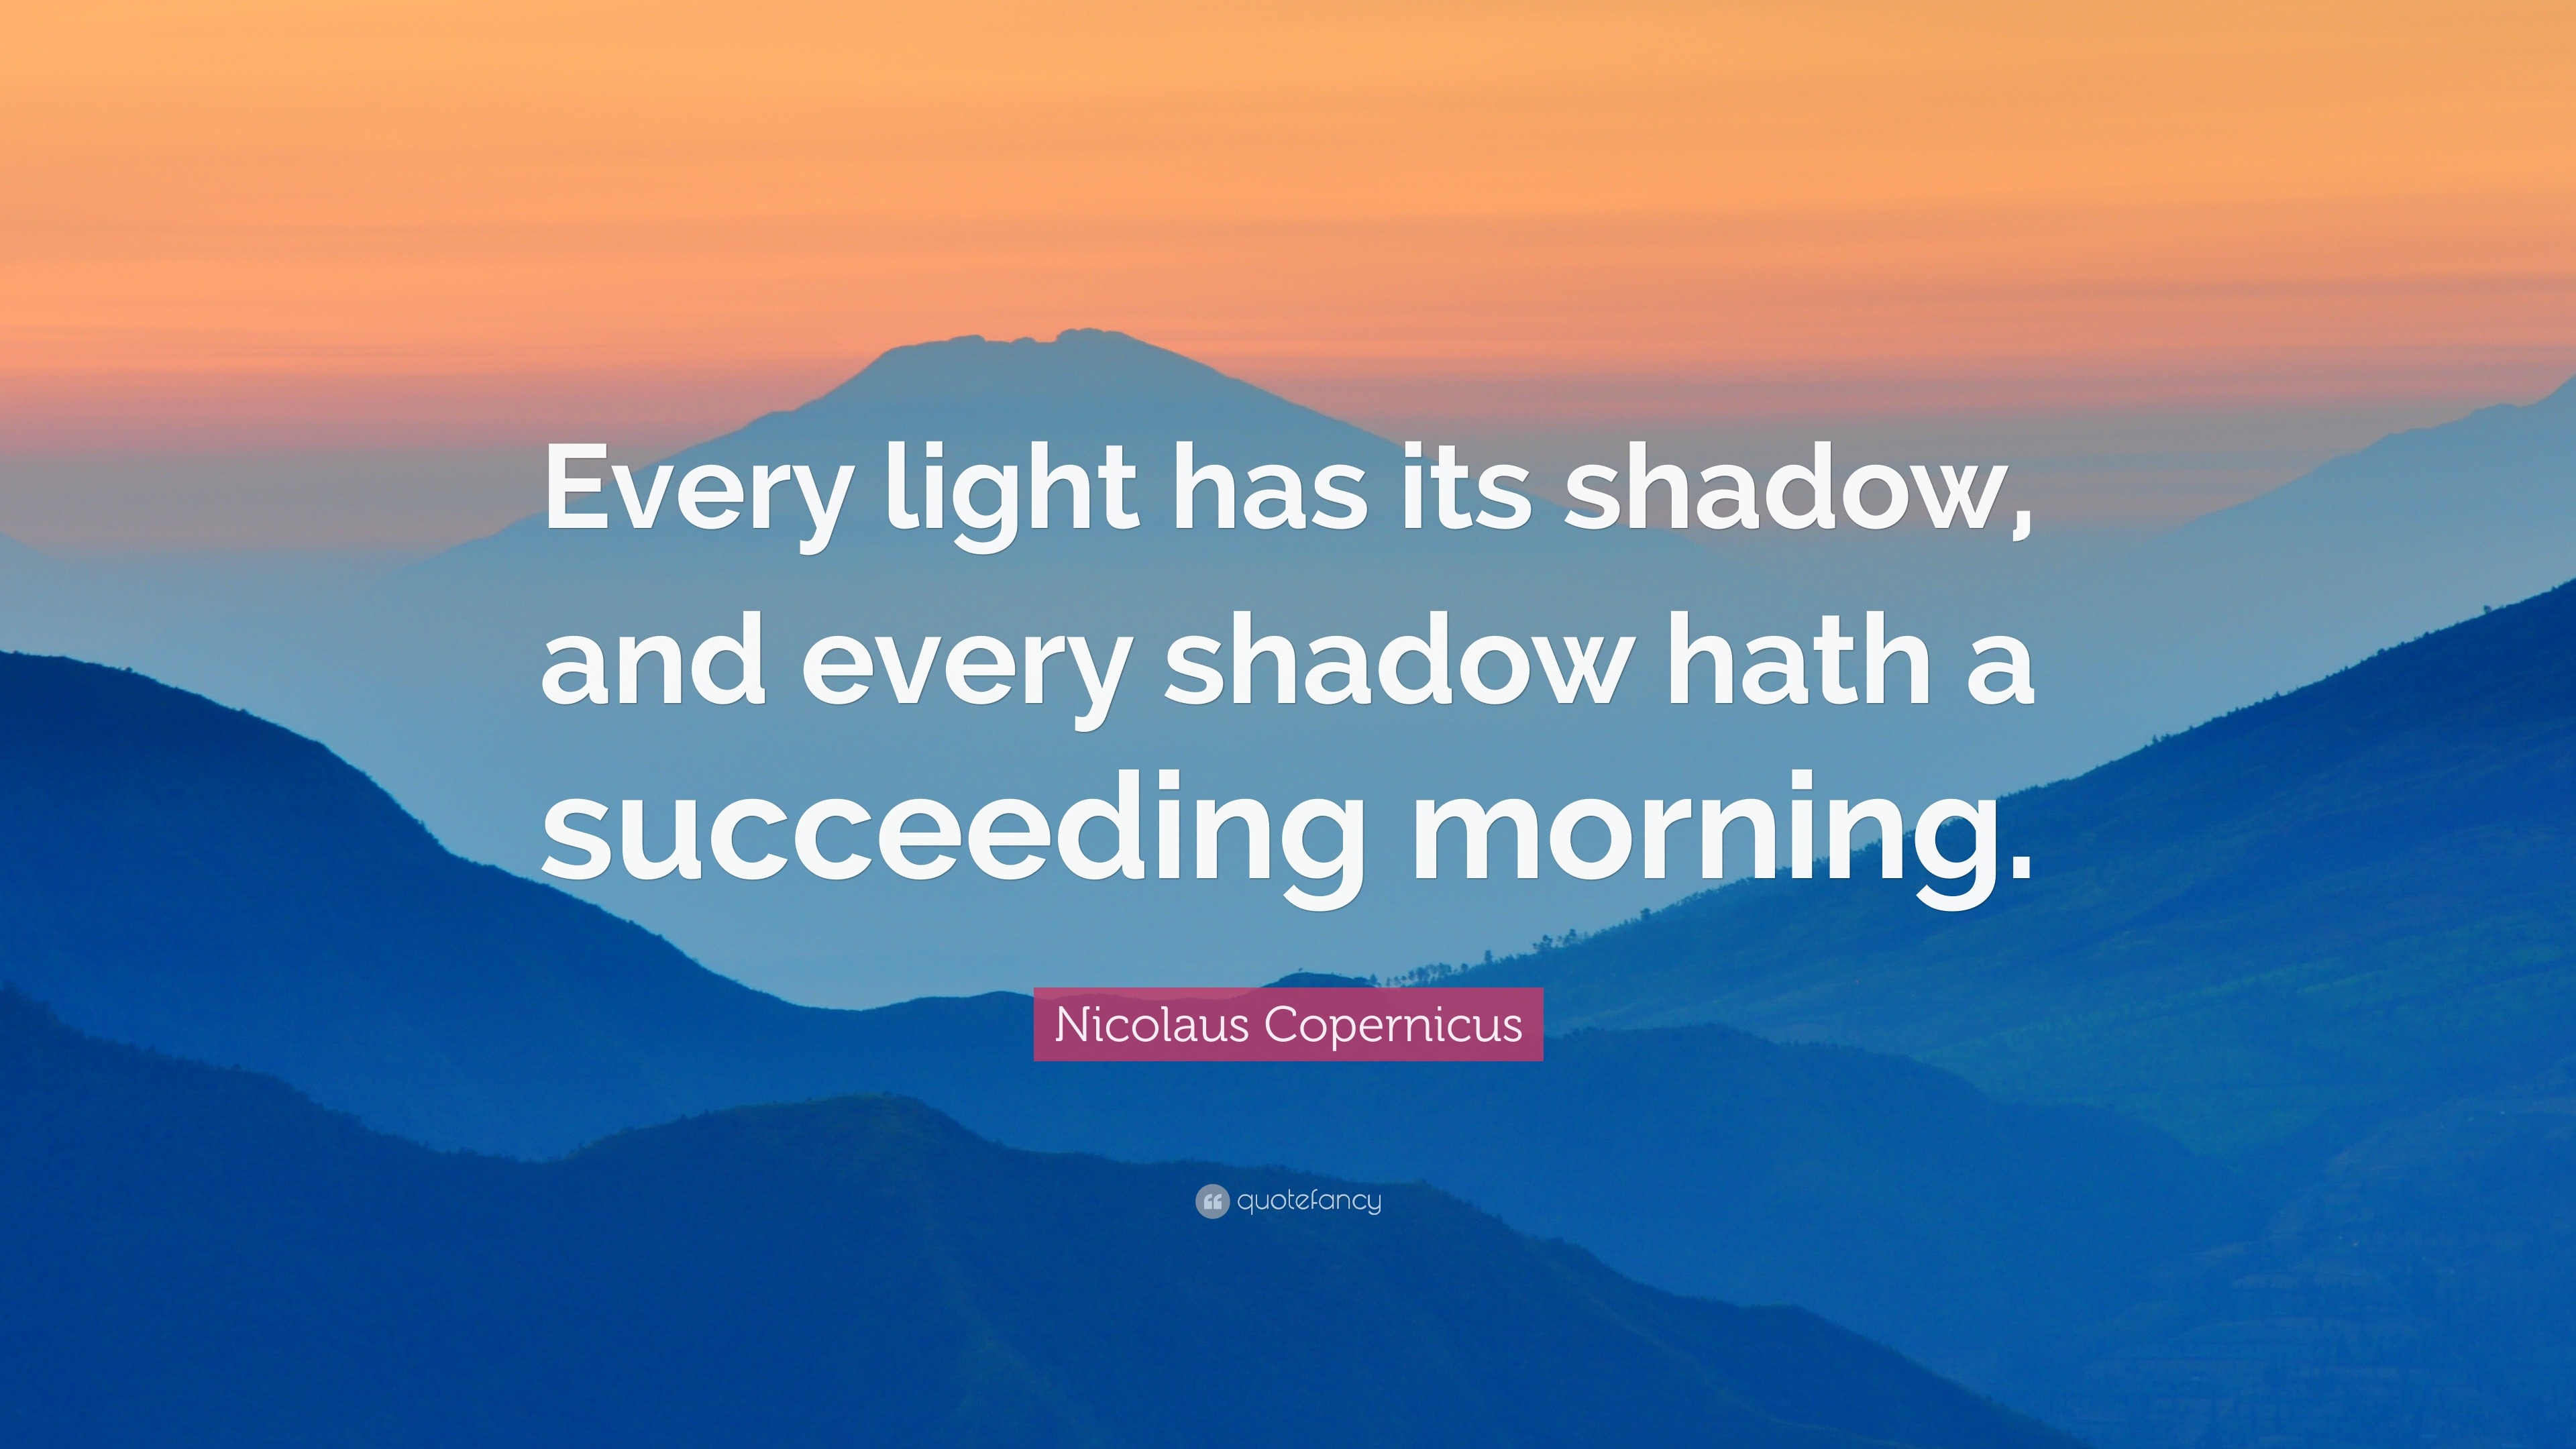 Nicolaus Copernicus Quote: “Every light has its shadow, and every